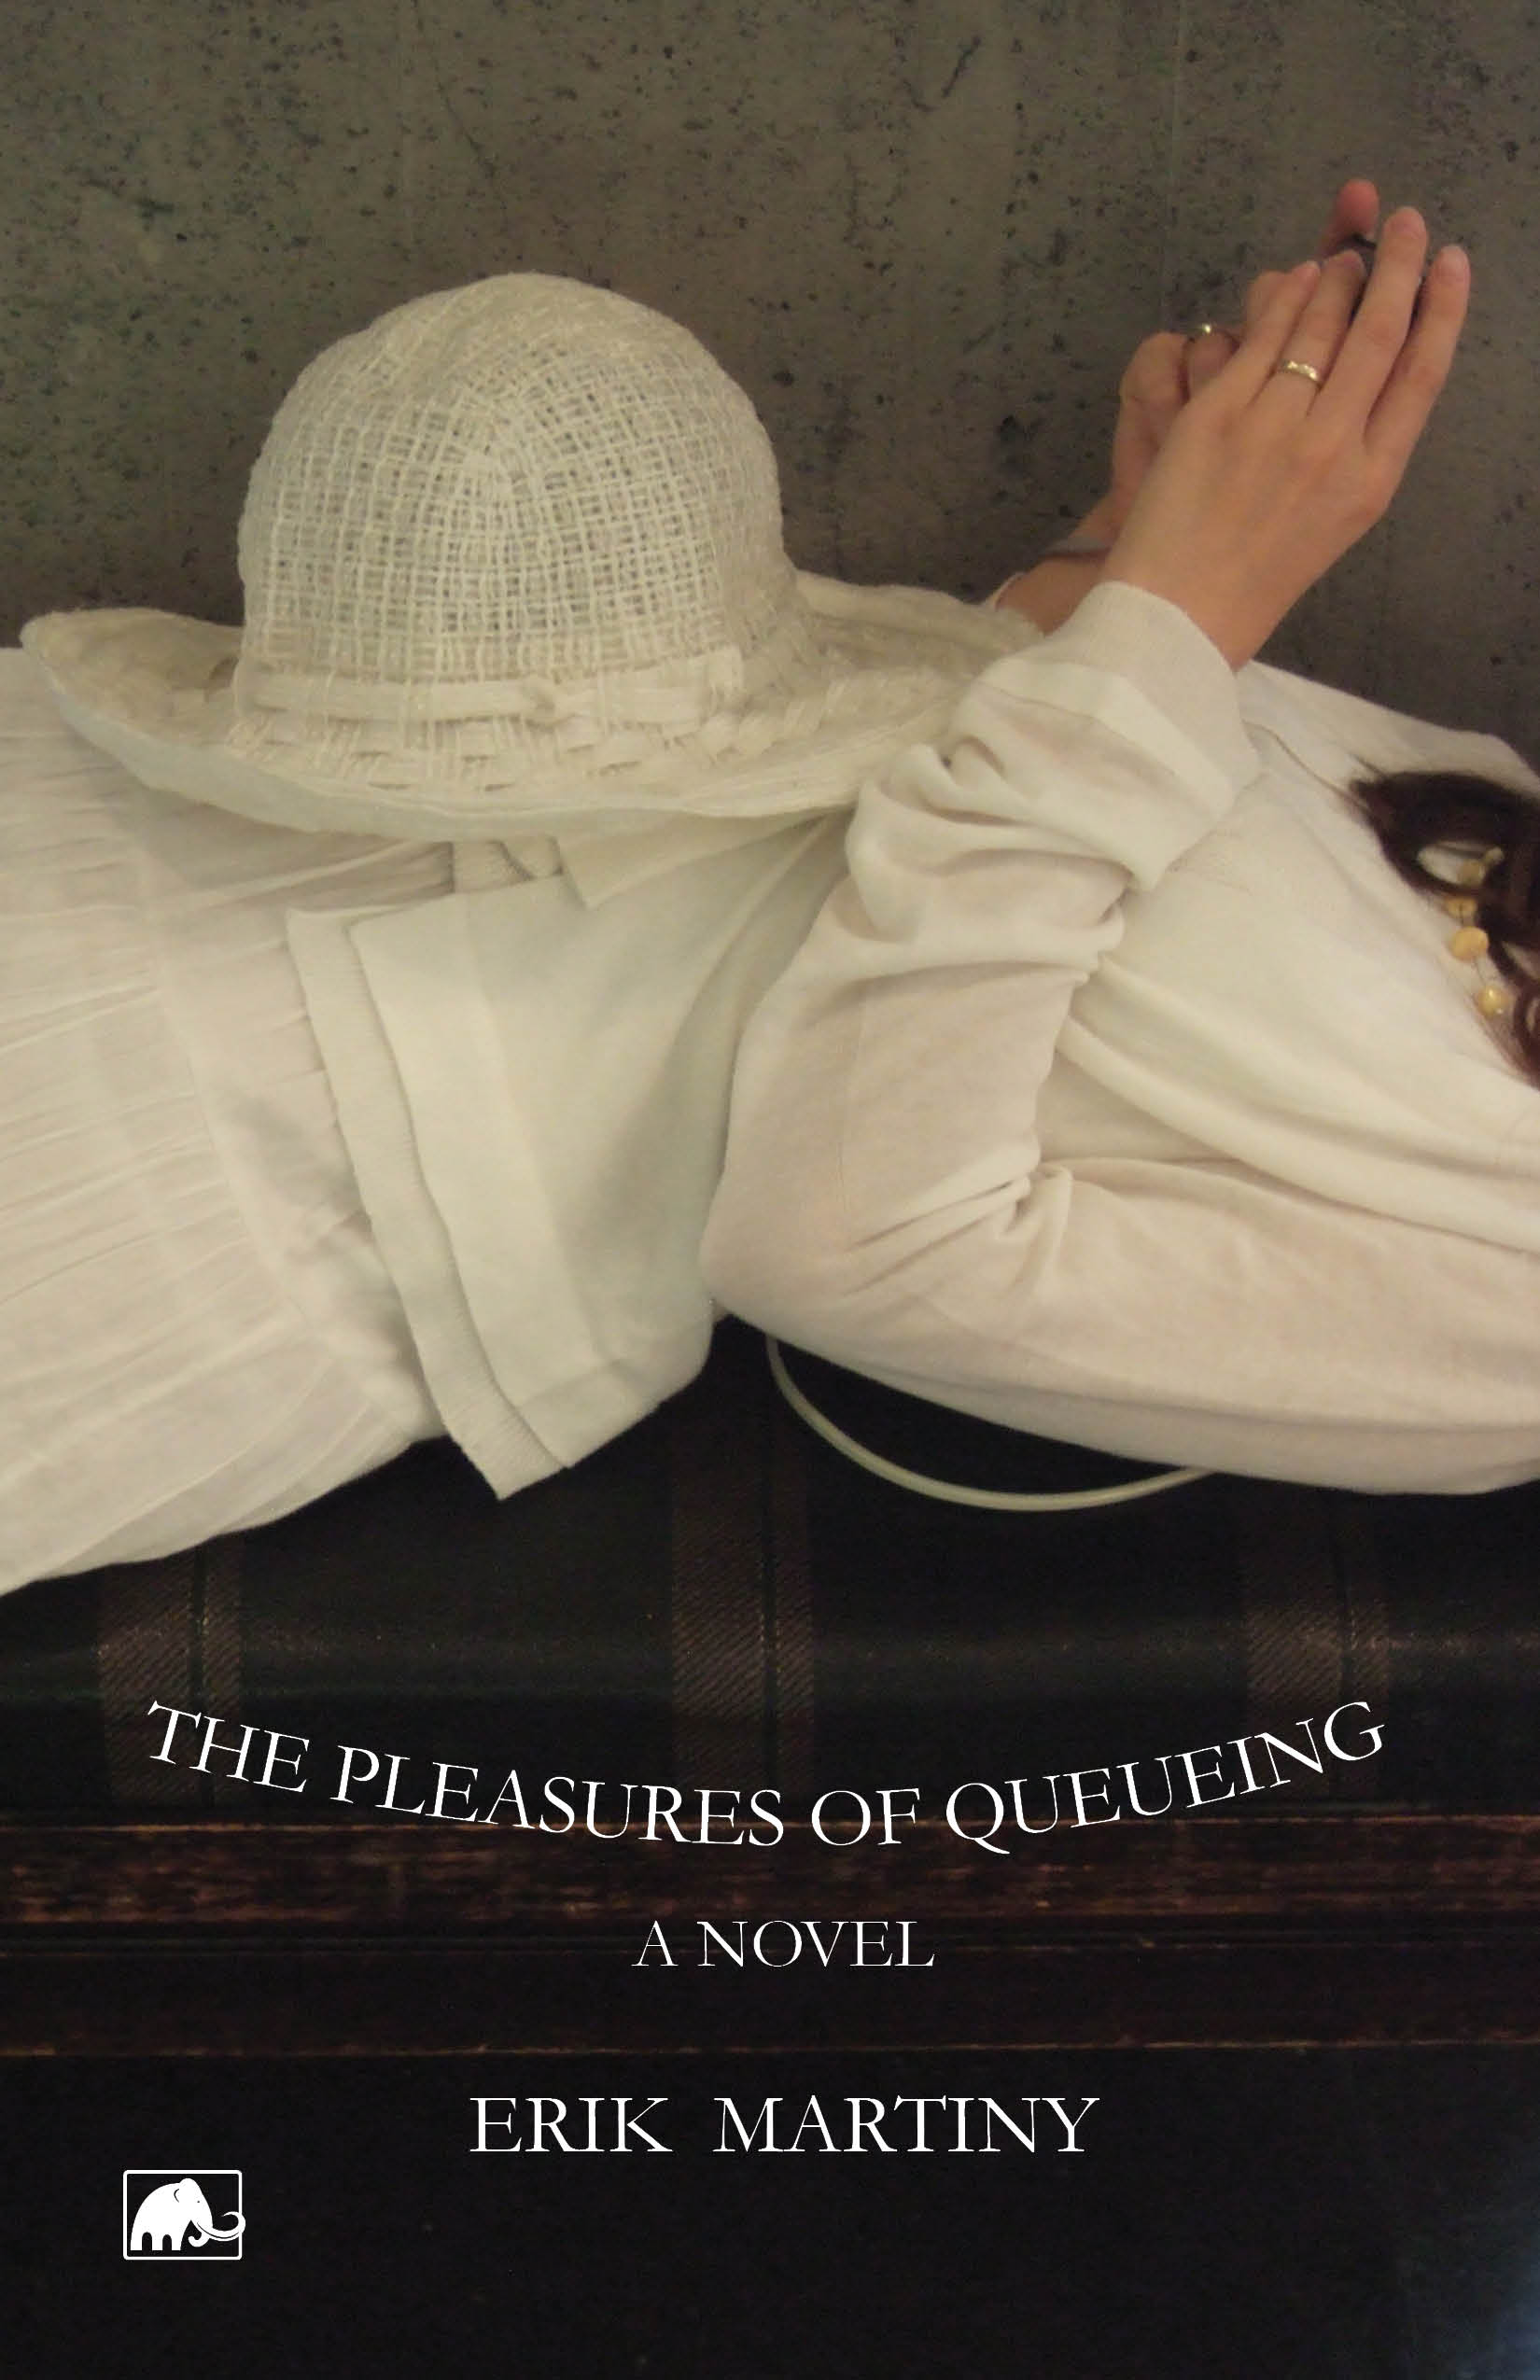 Review of 'The Pleasures of Queueing' by former MA student